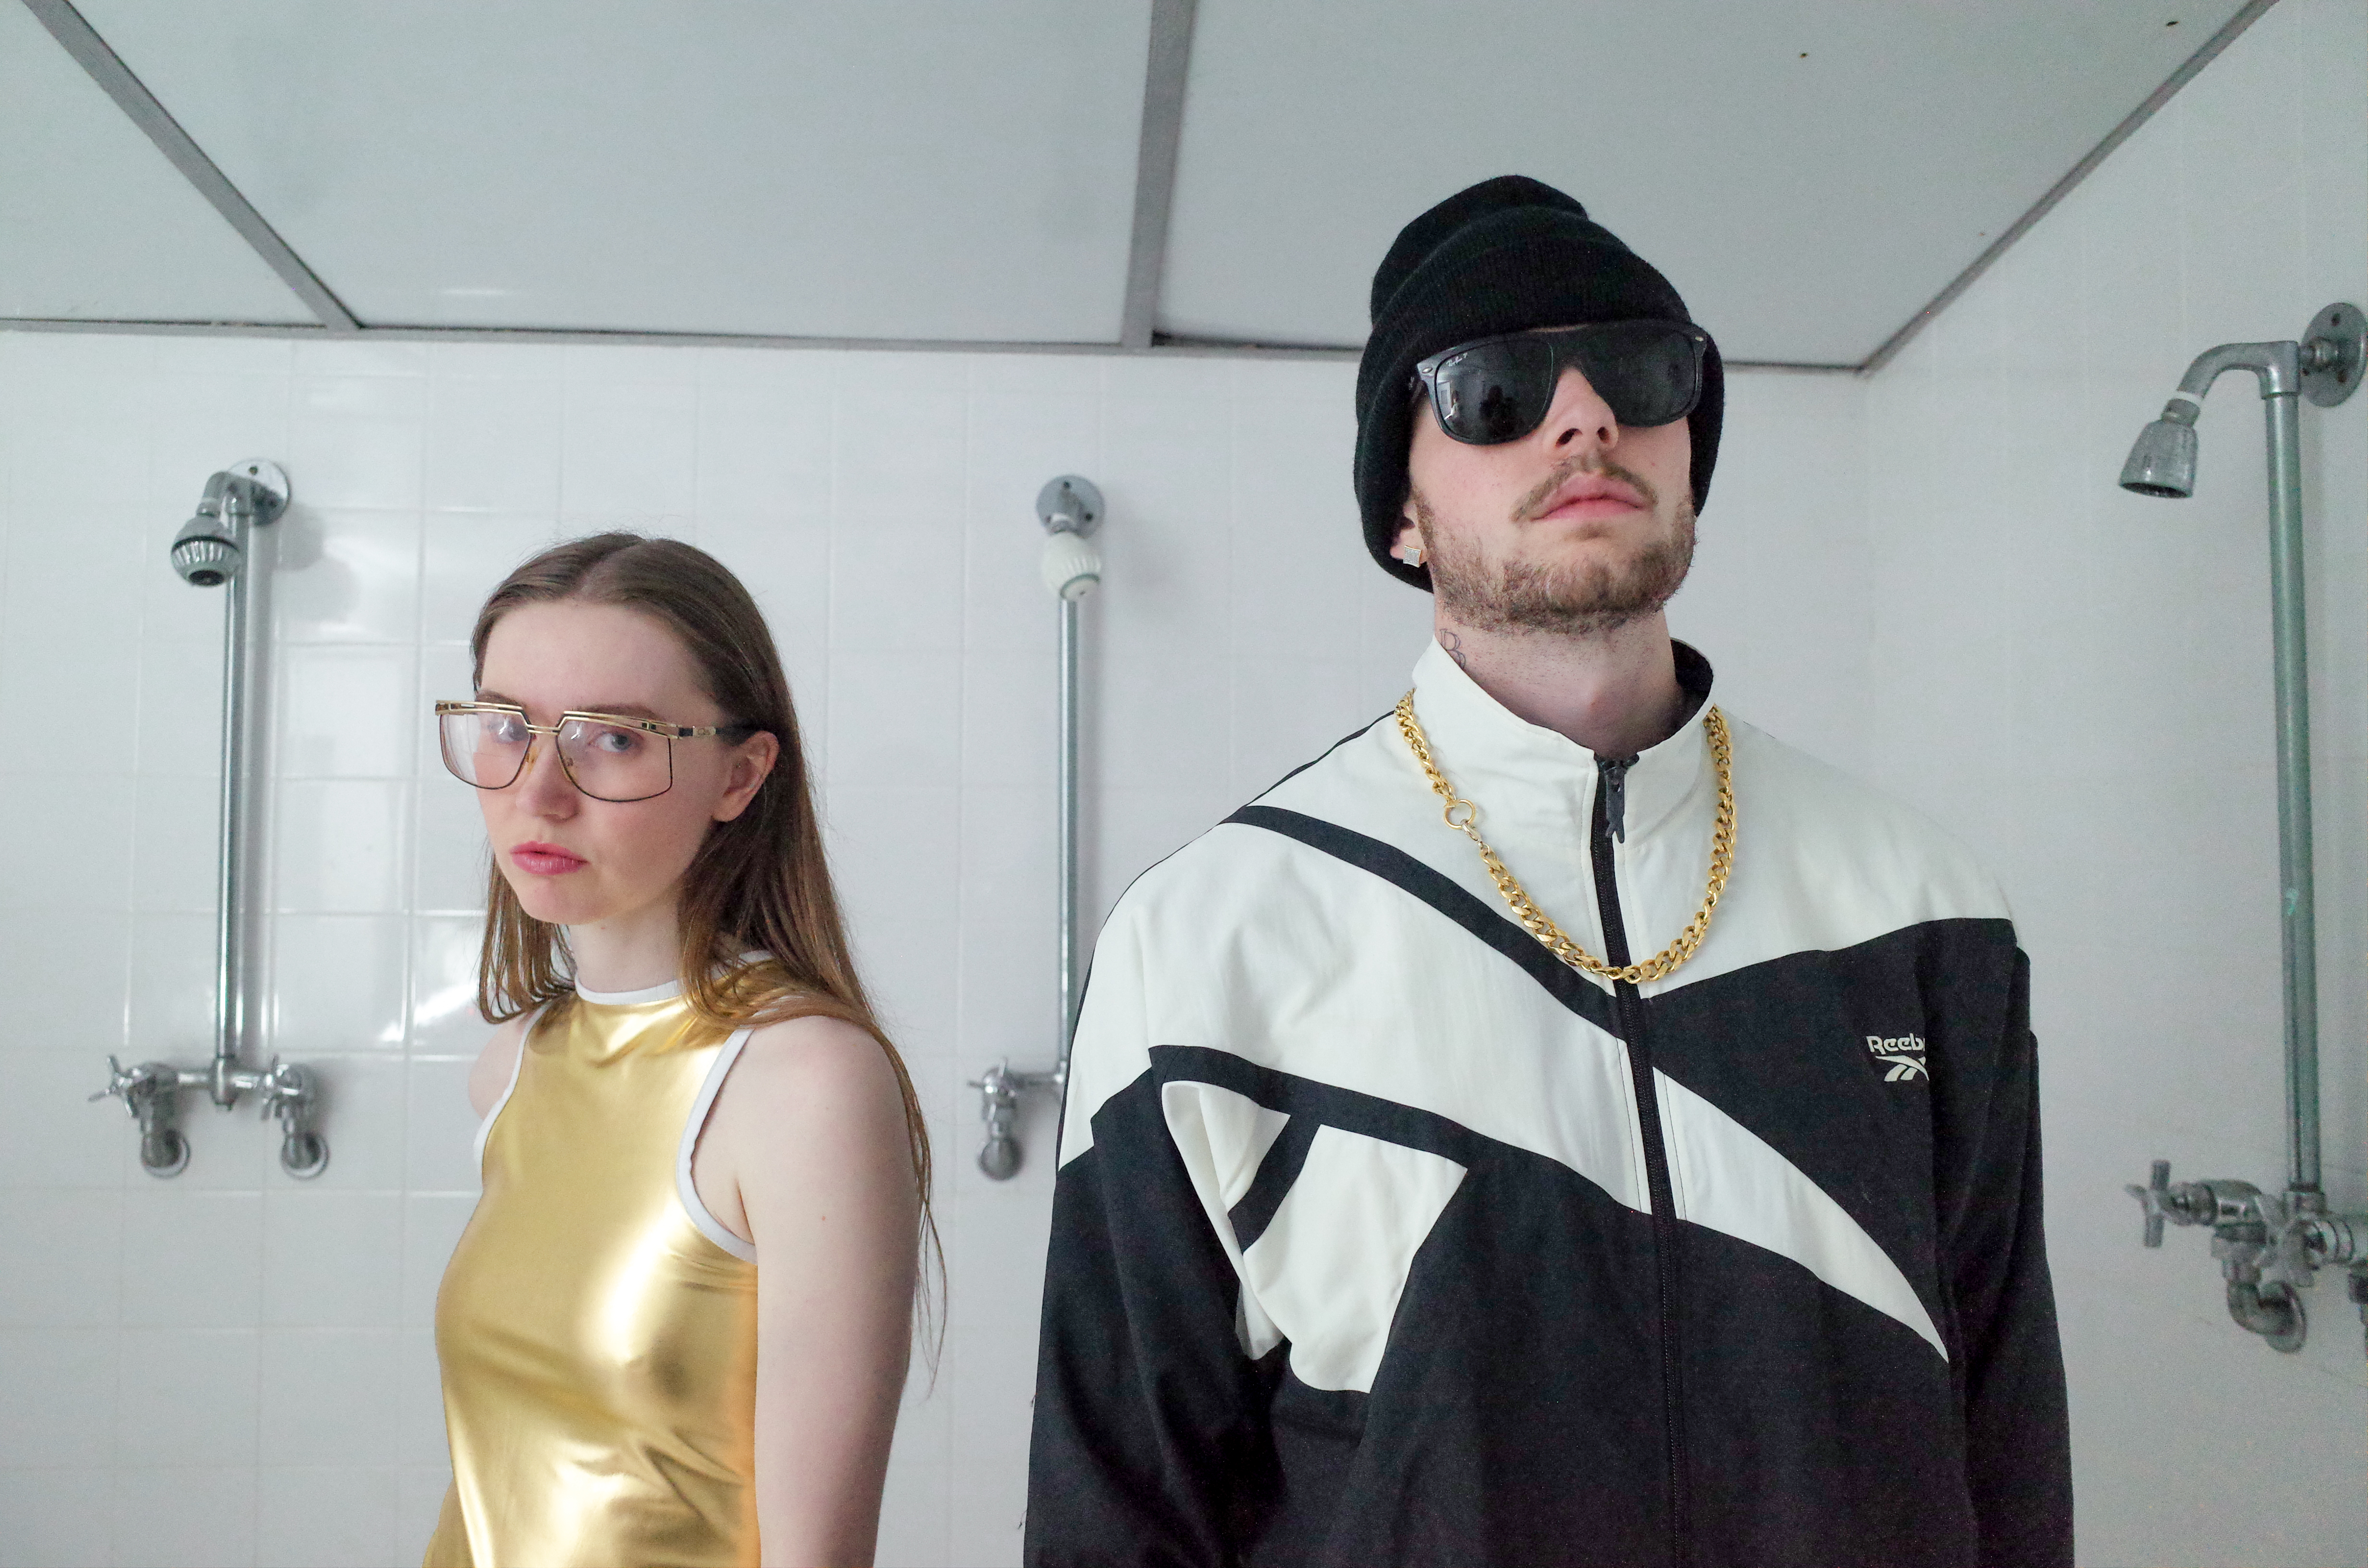 a white woman and man wearing outfits with accents of gold lame stand in a white tiled public shower room; the man is wearing dark glasses 